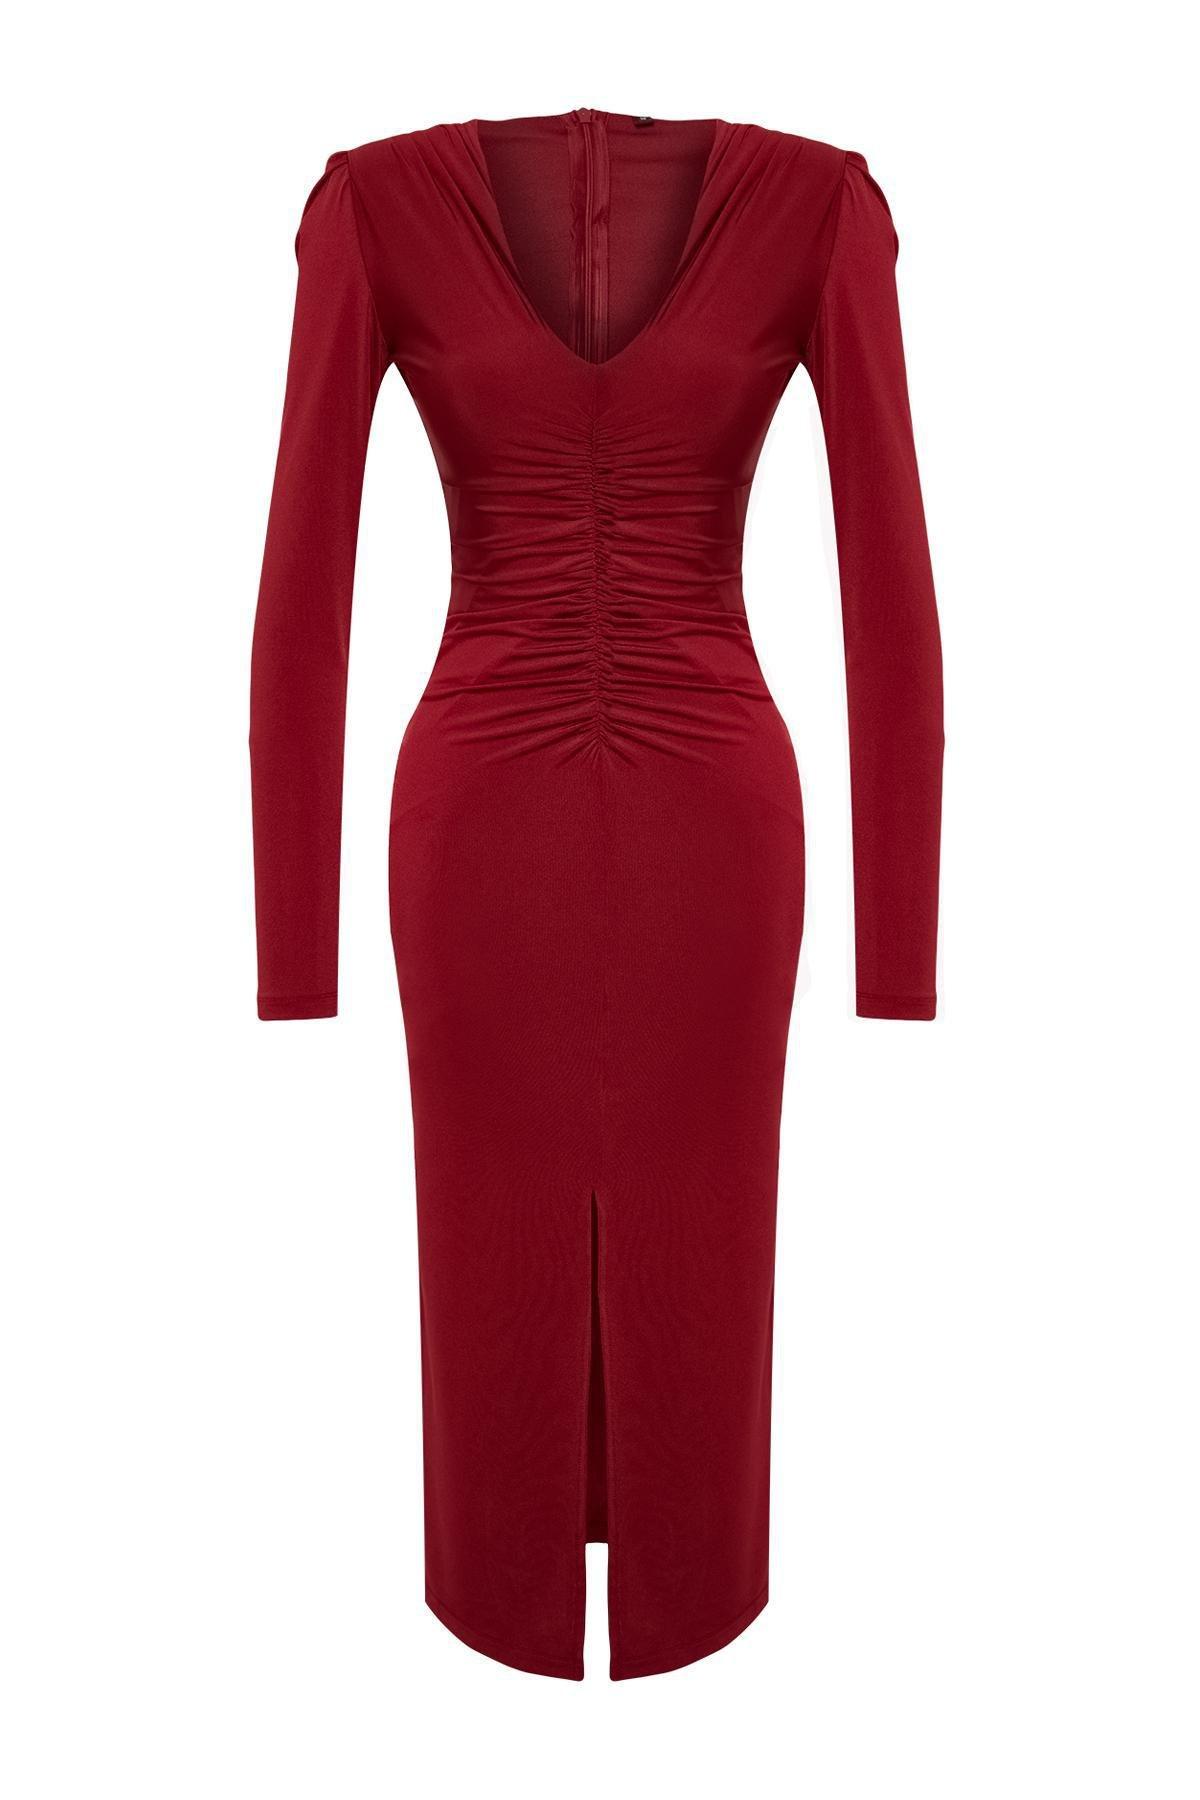 Trendyol - Burgundy Fitted Knitted Evening Dress